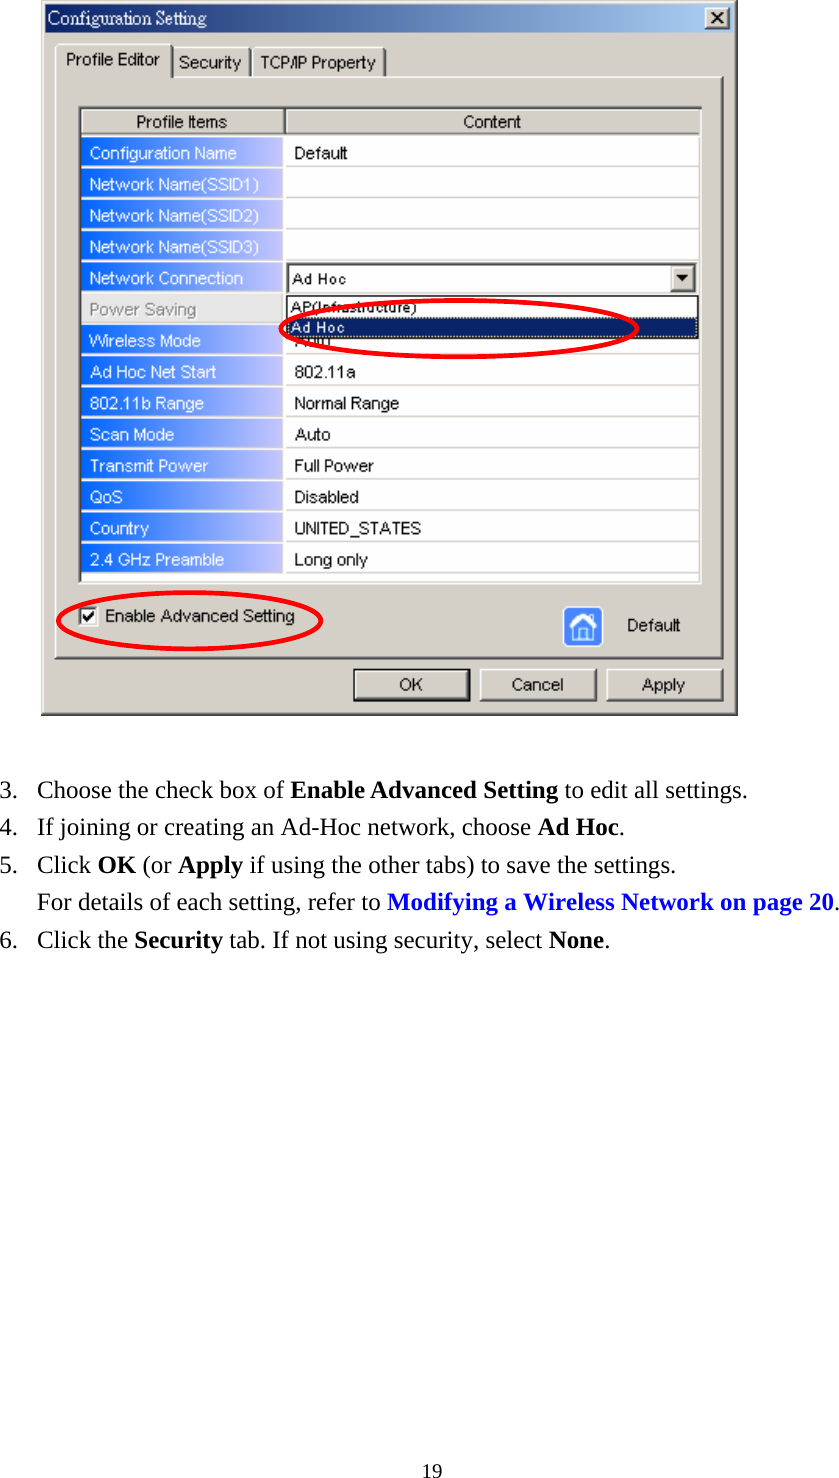  19  3. Choose the check box of Enable Advanced Setting to edit all settings.   4. If joining or creating an Ad-Hoc network, choose Ad Hoc. 5. Click OK (or Apply if using the other tabs) to save the settings. For details of each setting, refer to Modifying a Wireless Network on page 20. 6. Click the Security tab. If not using security, select None. 